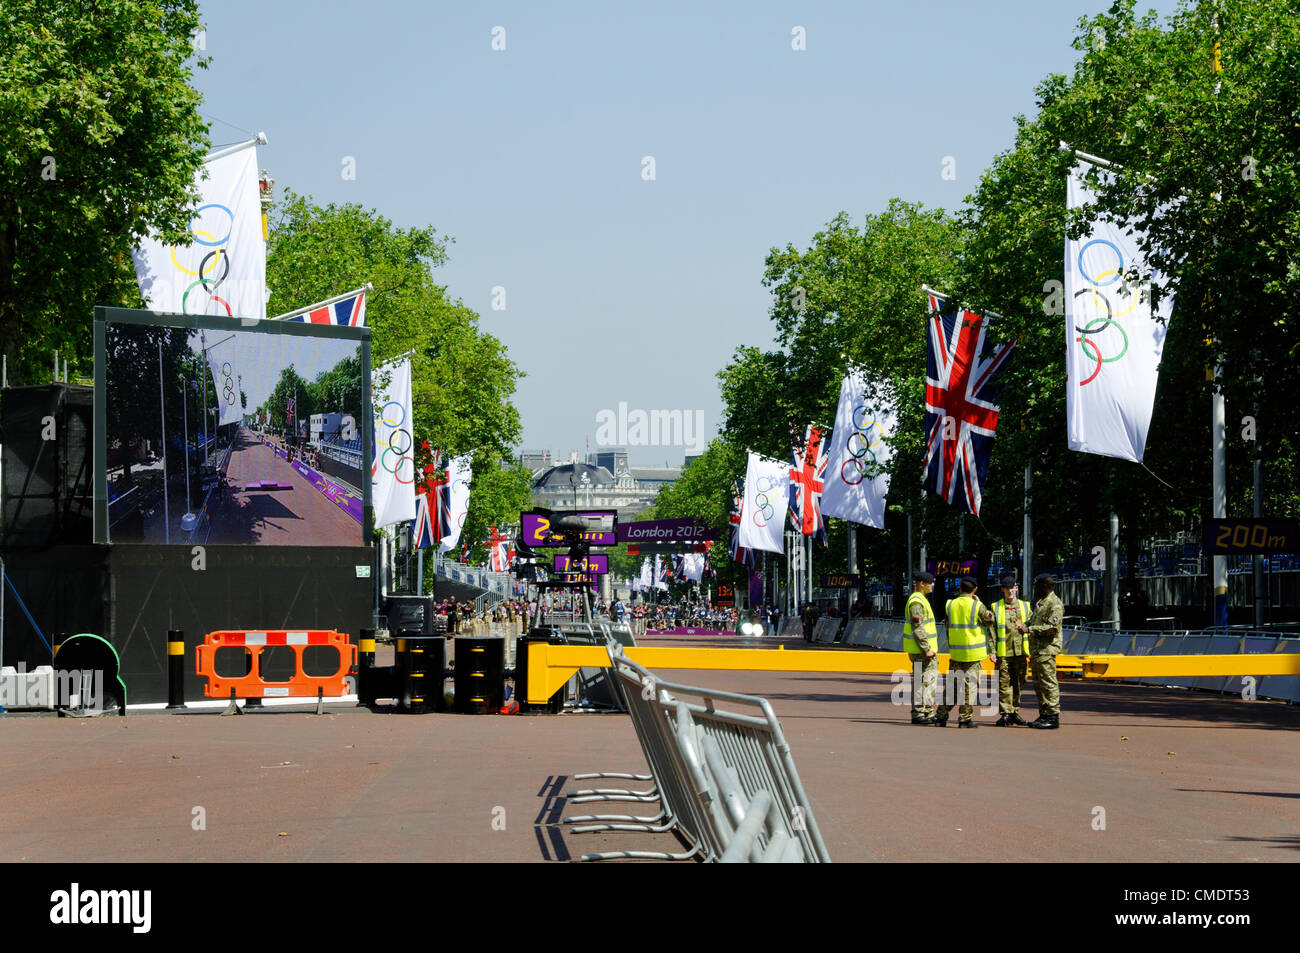 LONDON, UK, Thursday July 26, 2012. One day before London 2012 Olympic Games opening ceremony on the Mall. Stock Photo